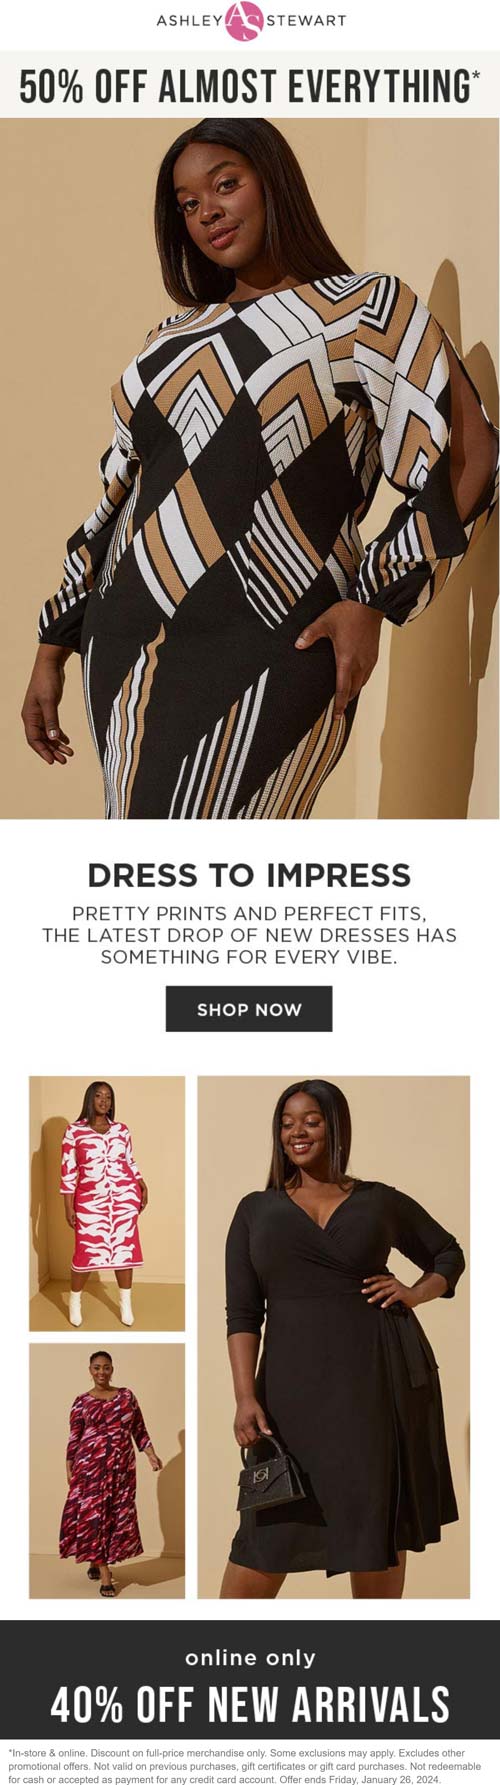 Ashley Stewart stores Coupon  40-50% off online today at Ashley Stewart #ashleystewart 